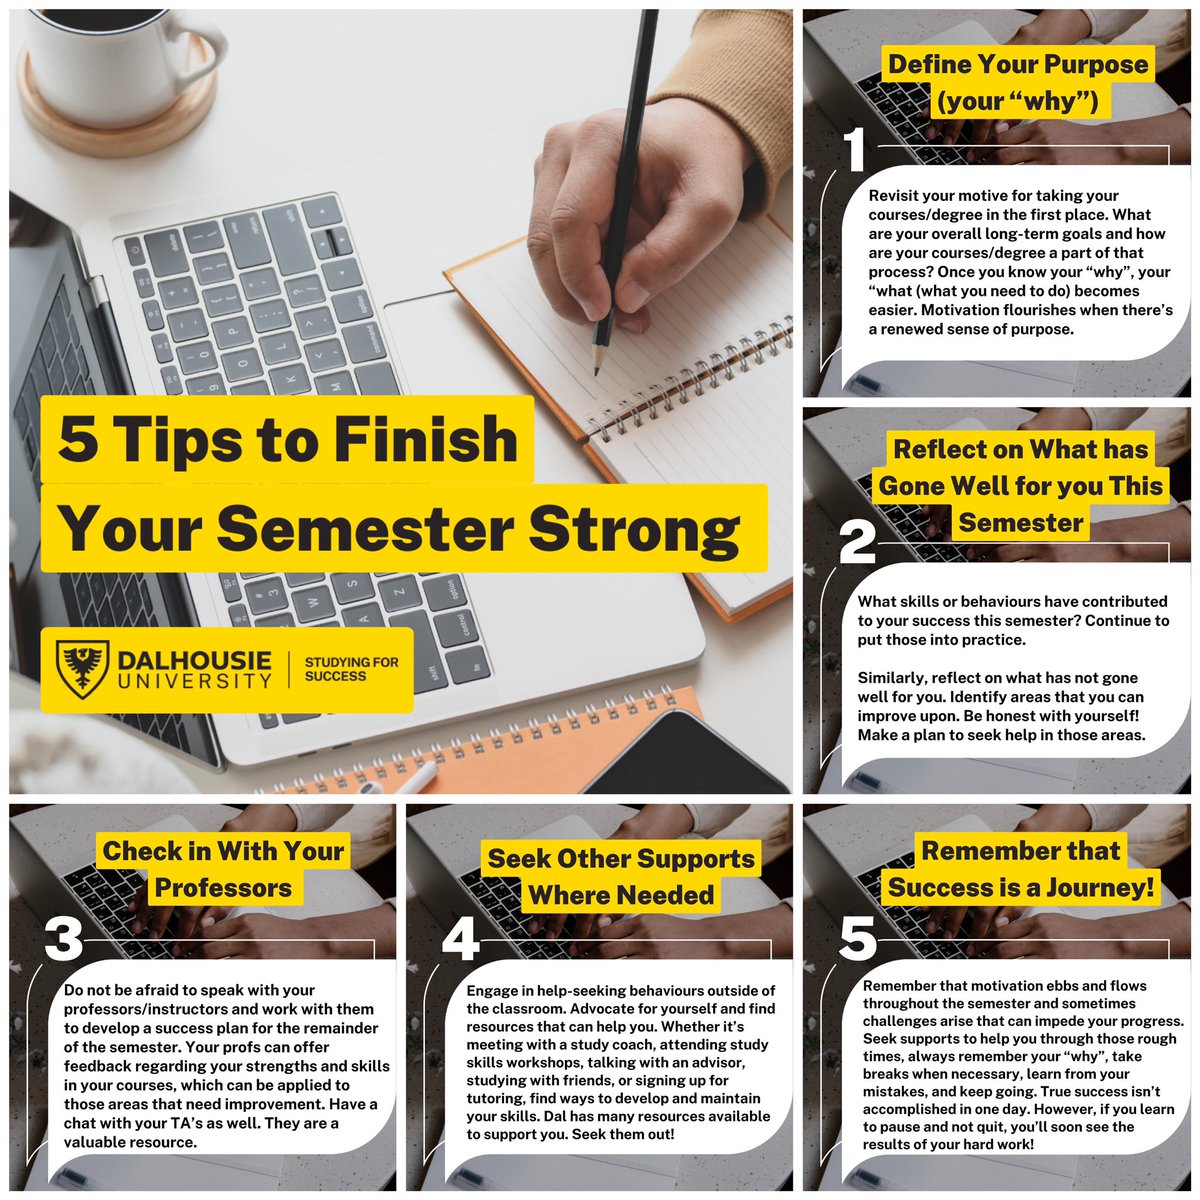 Want to finish your semester off strong? Here are a few tips you can follow. #StudentSupport #StudentSuccess #DalhousieU #DalhousieUniversity #DalStudentLife #StudentLife #DalStudentSuccess #StudySmarter #DalhousieStudying